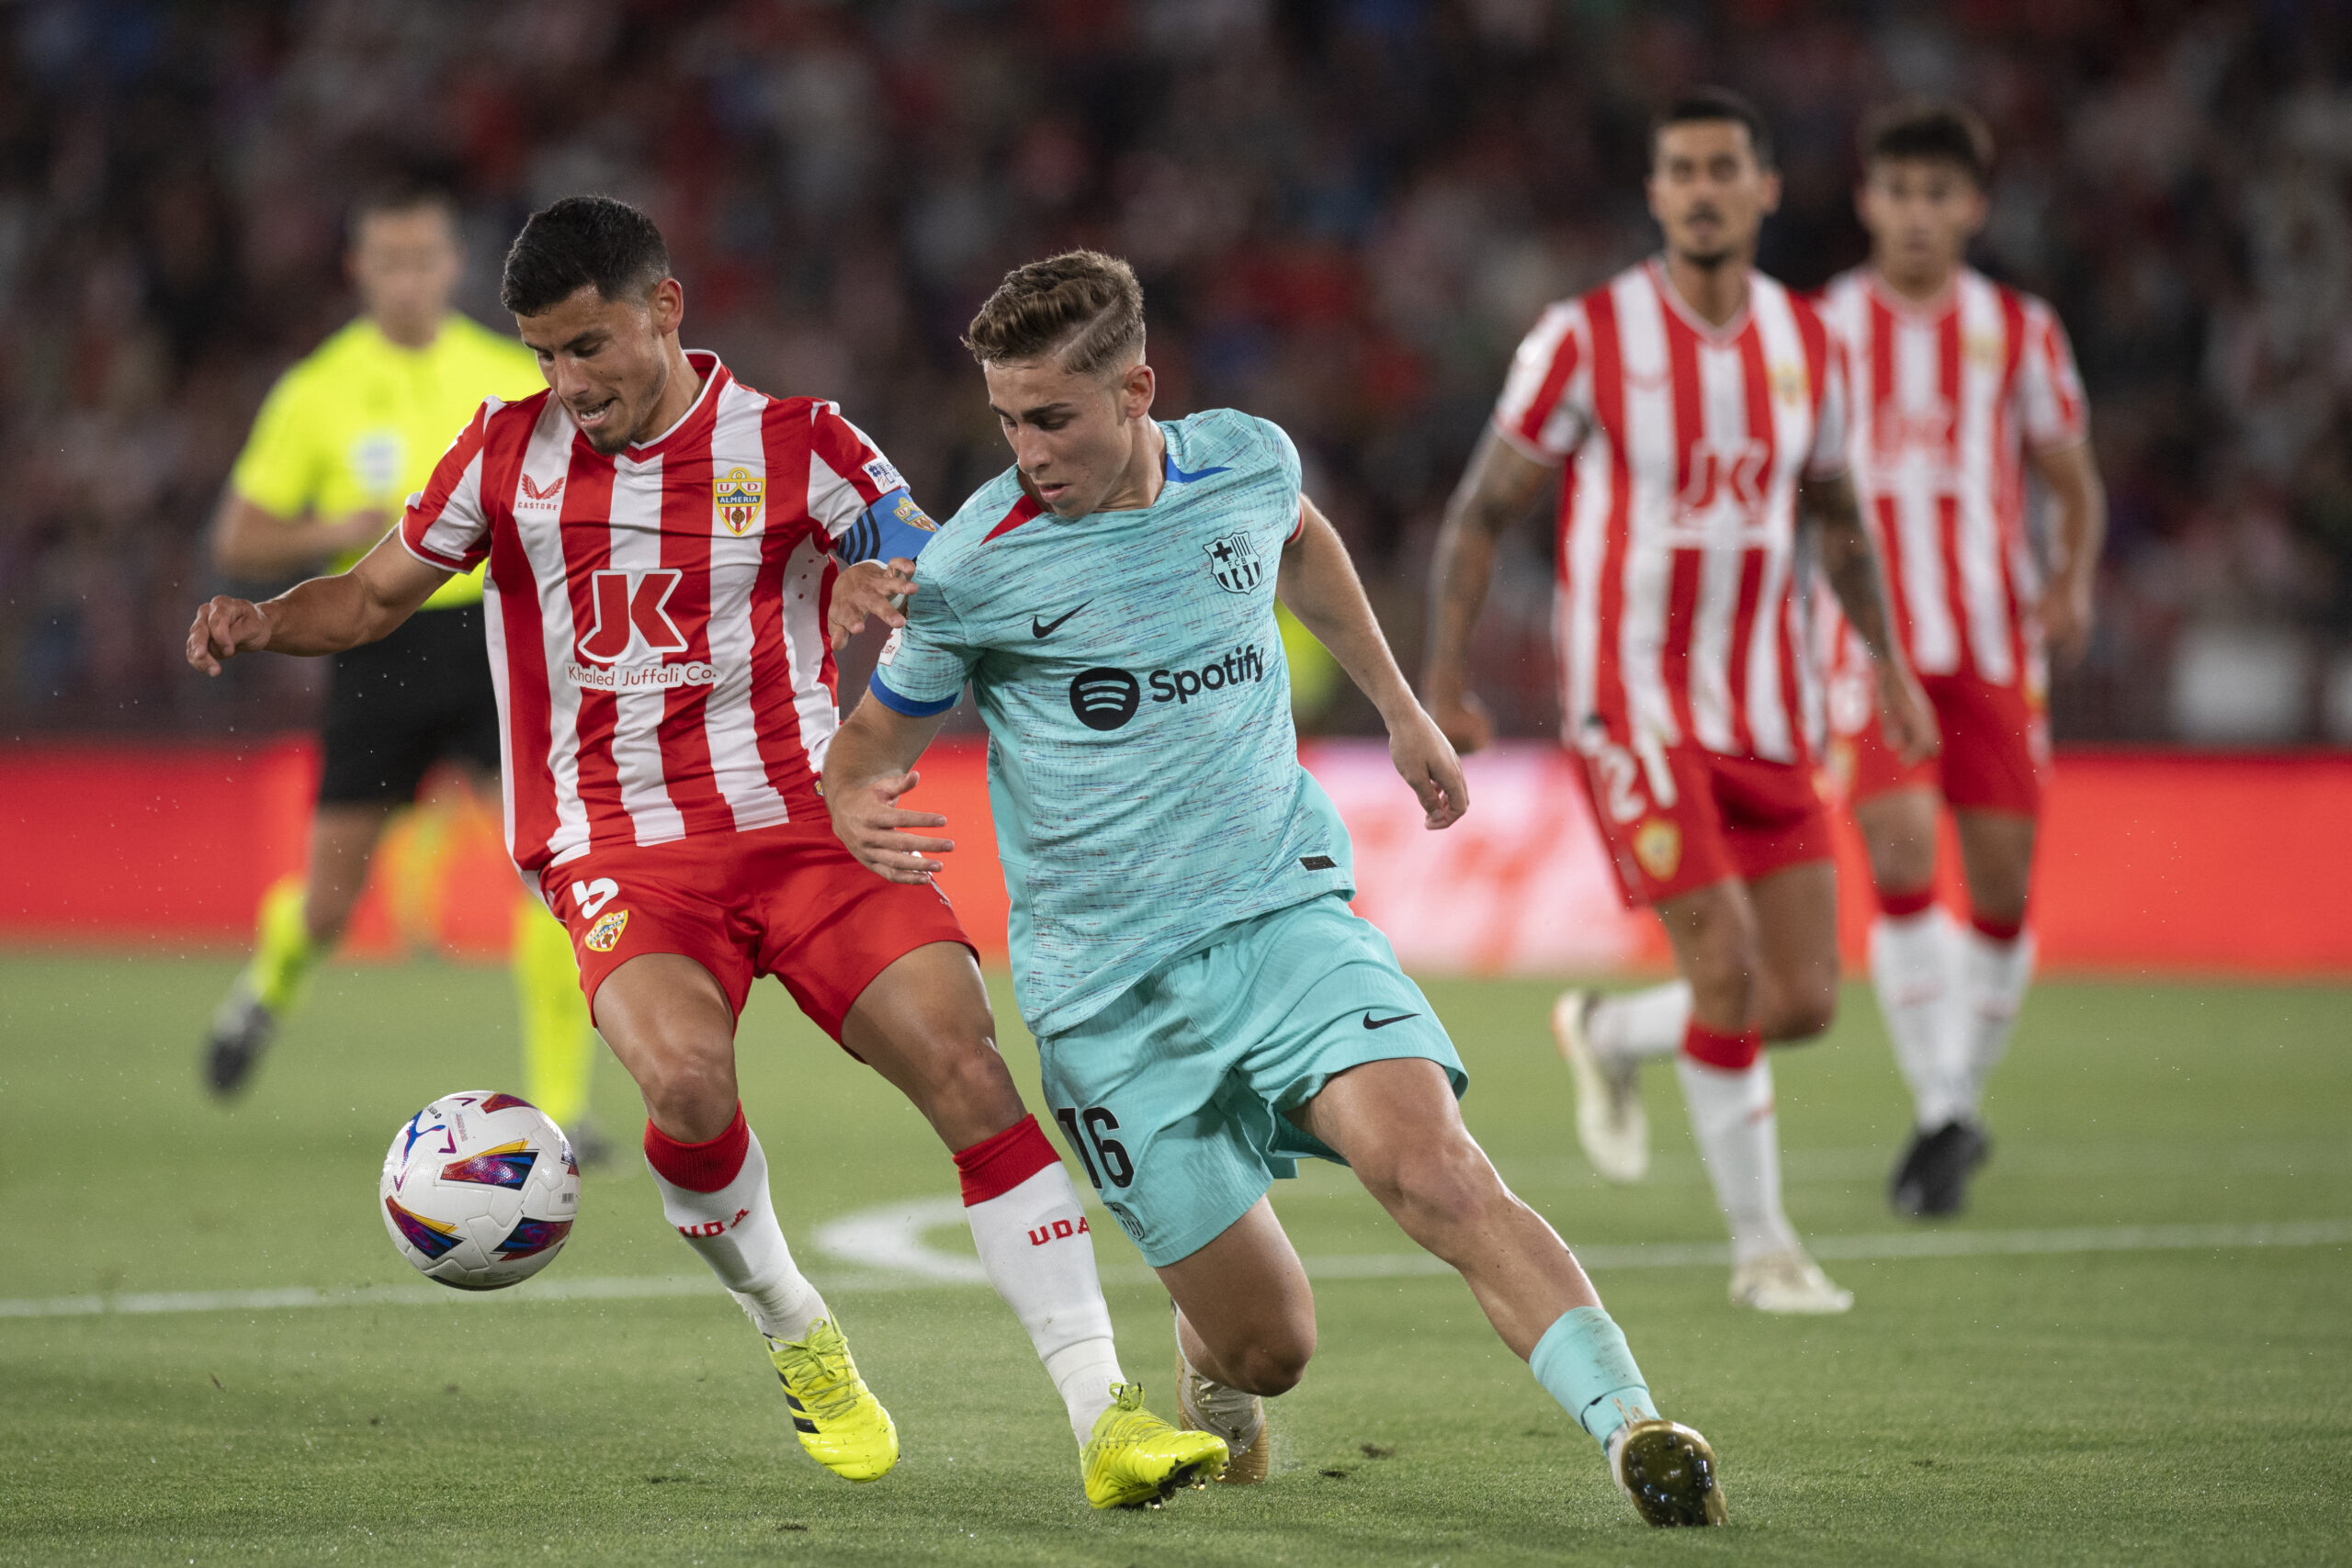 Almeria's Argentine midfielder #05 Lucas Robertone and Barcelona's Spanish midfielder #16 Fermin Lopez vie for the ball during the Spanish league football match between UD Almeria and FC Barcelona at the Municipal Stadium of the Mediterranean Games in Almeria on May 16, 2024.